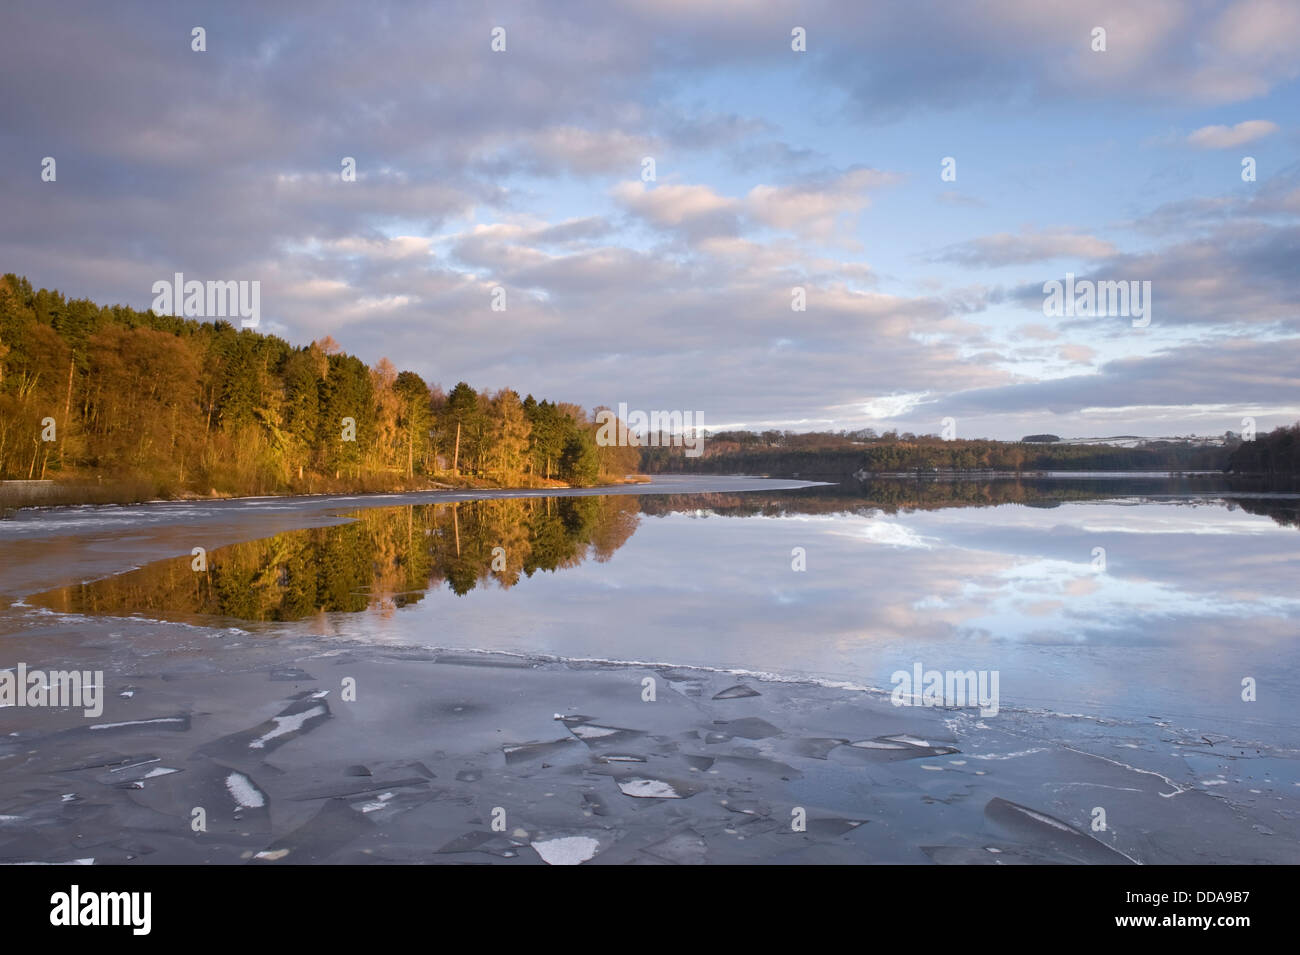 Scenic winter view across icy suface of Swinsty Reservoir where woodland trees & dramatic sky are reflected in water - North Yorkshire, England, UK. Stock Photo